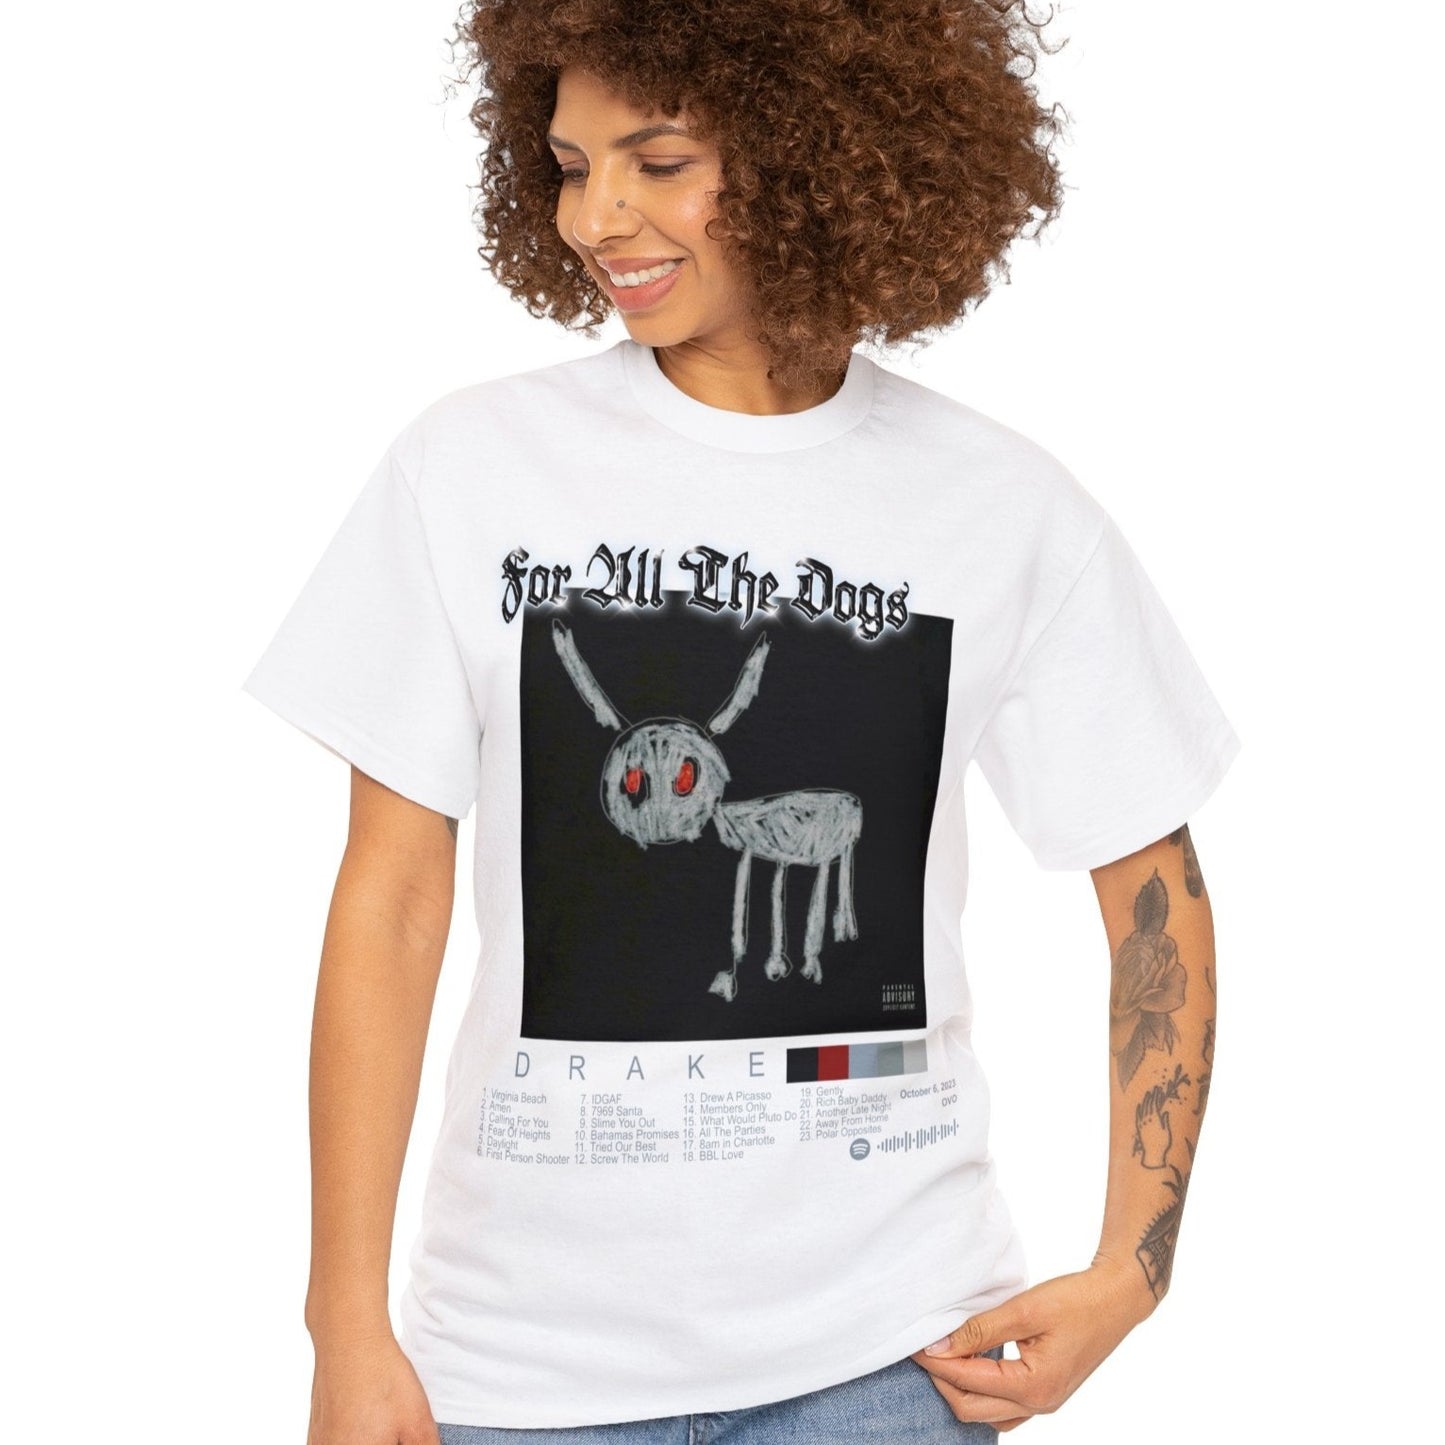 Drake Album Tee - For All The Dogs